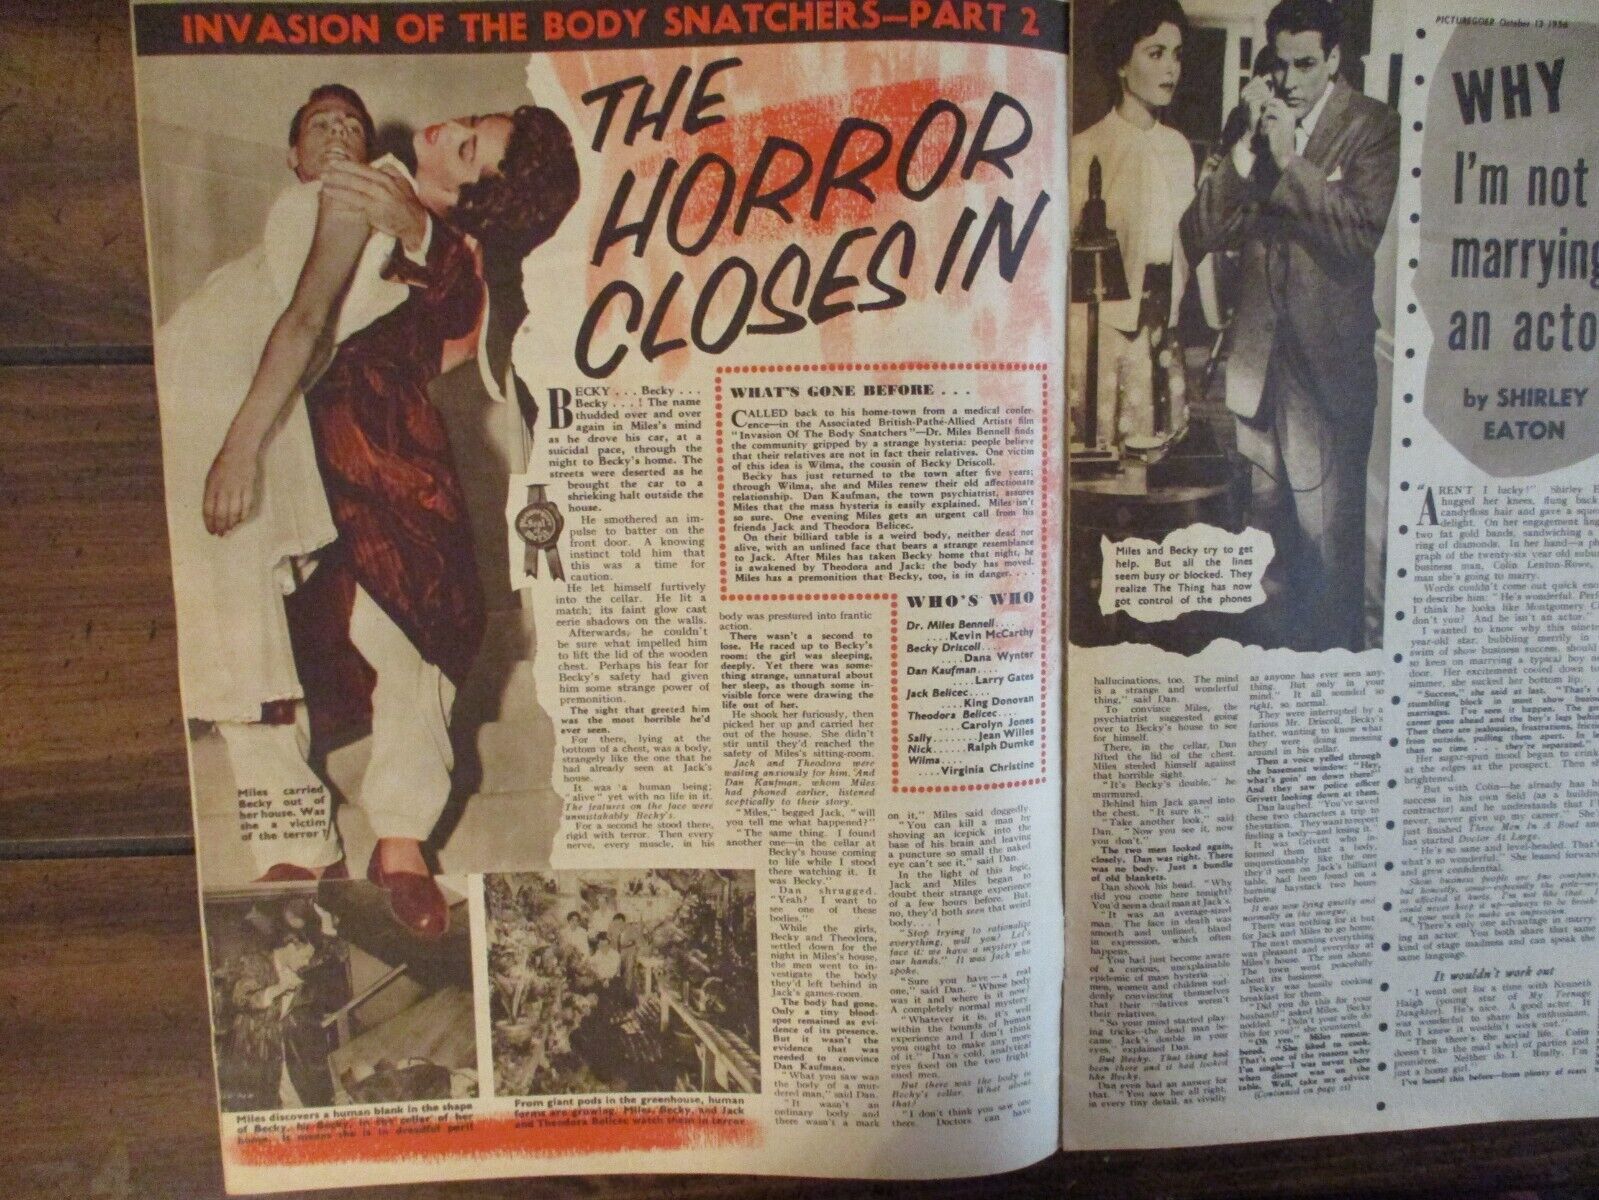 Oc-1956 Picturegoer Mag(INVASION OF THE BODY SNATCHERS/LUCY MARLOW/SHIRLEY EATON